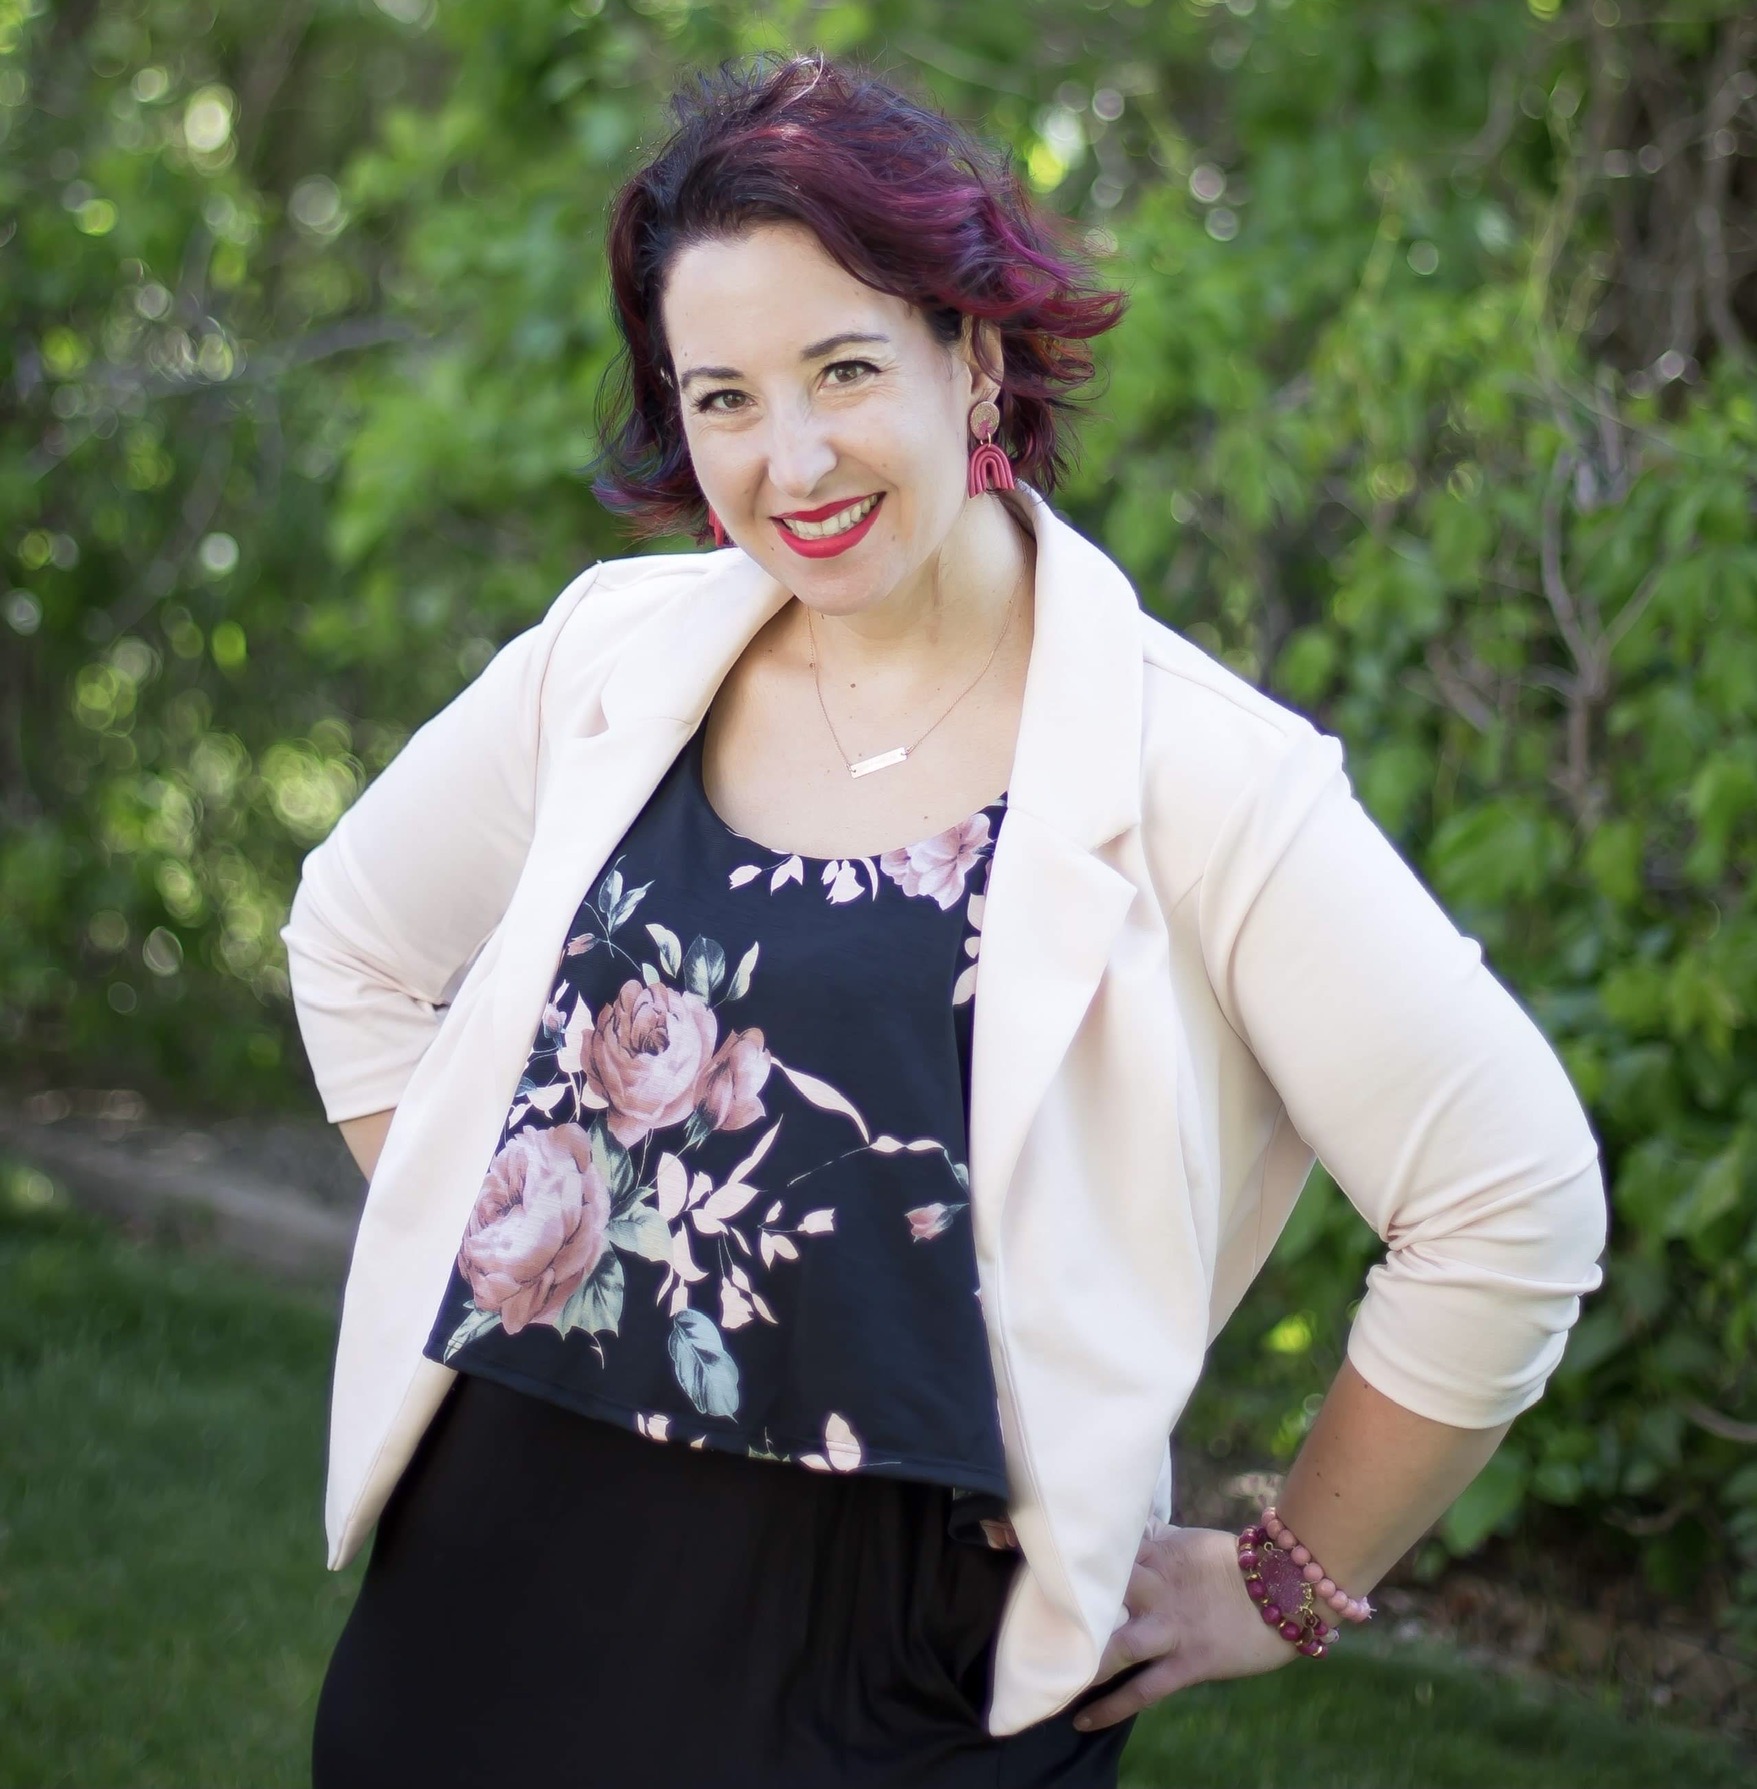 A white woman and outspoken advocate with multiple sclerosis wearing a black dress with a floral top and pink blazer while smiling in her back yard.